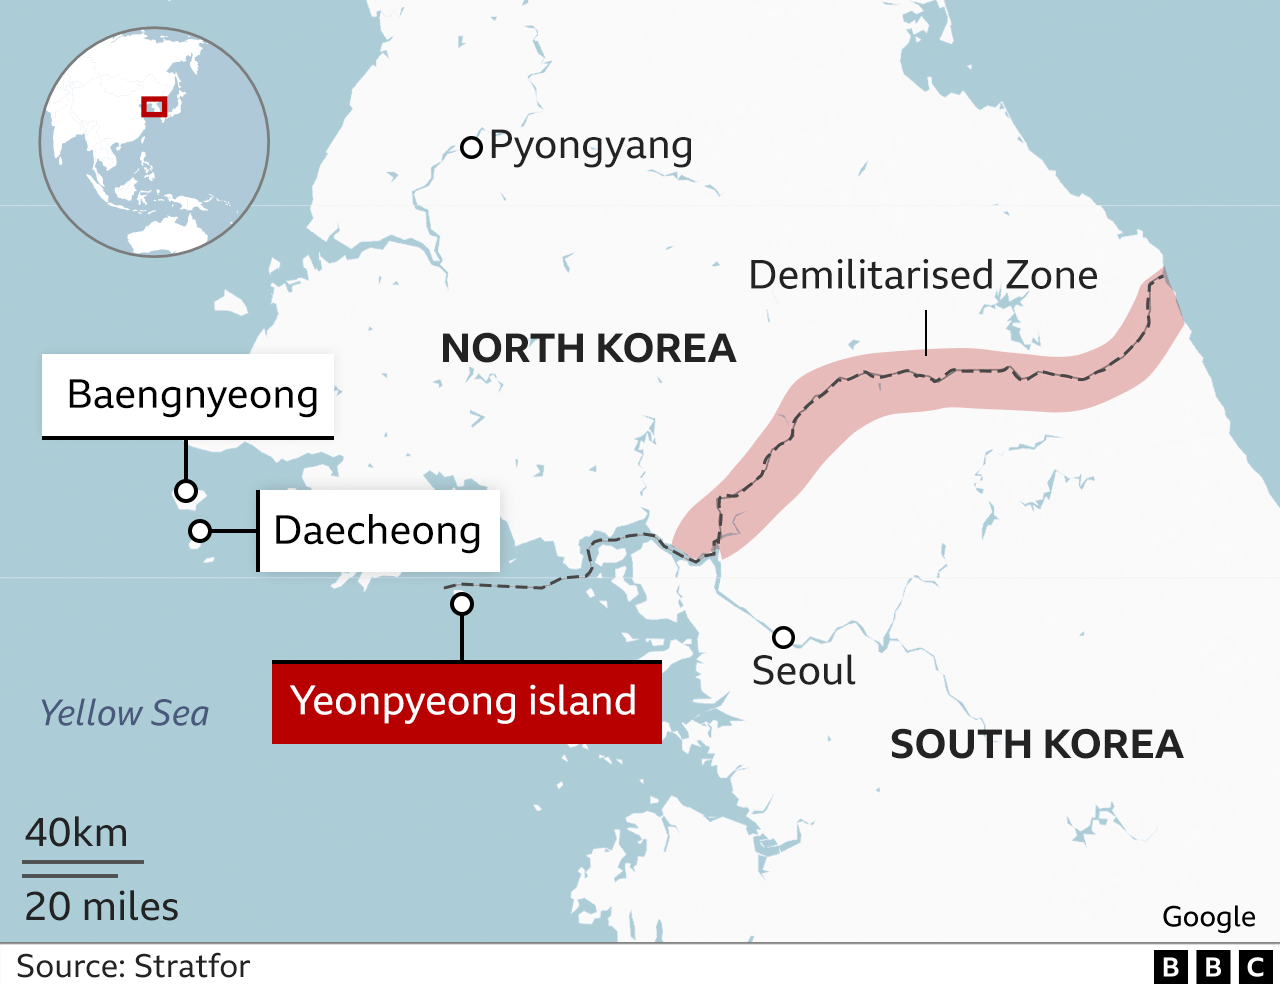 A BBC map shows North and South Korea with the respective capitals, Pyongyang and Seoul, both marked - along with the South's Yeonpyeong, Daecheong and Baengnyeong islands to the west